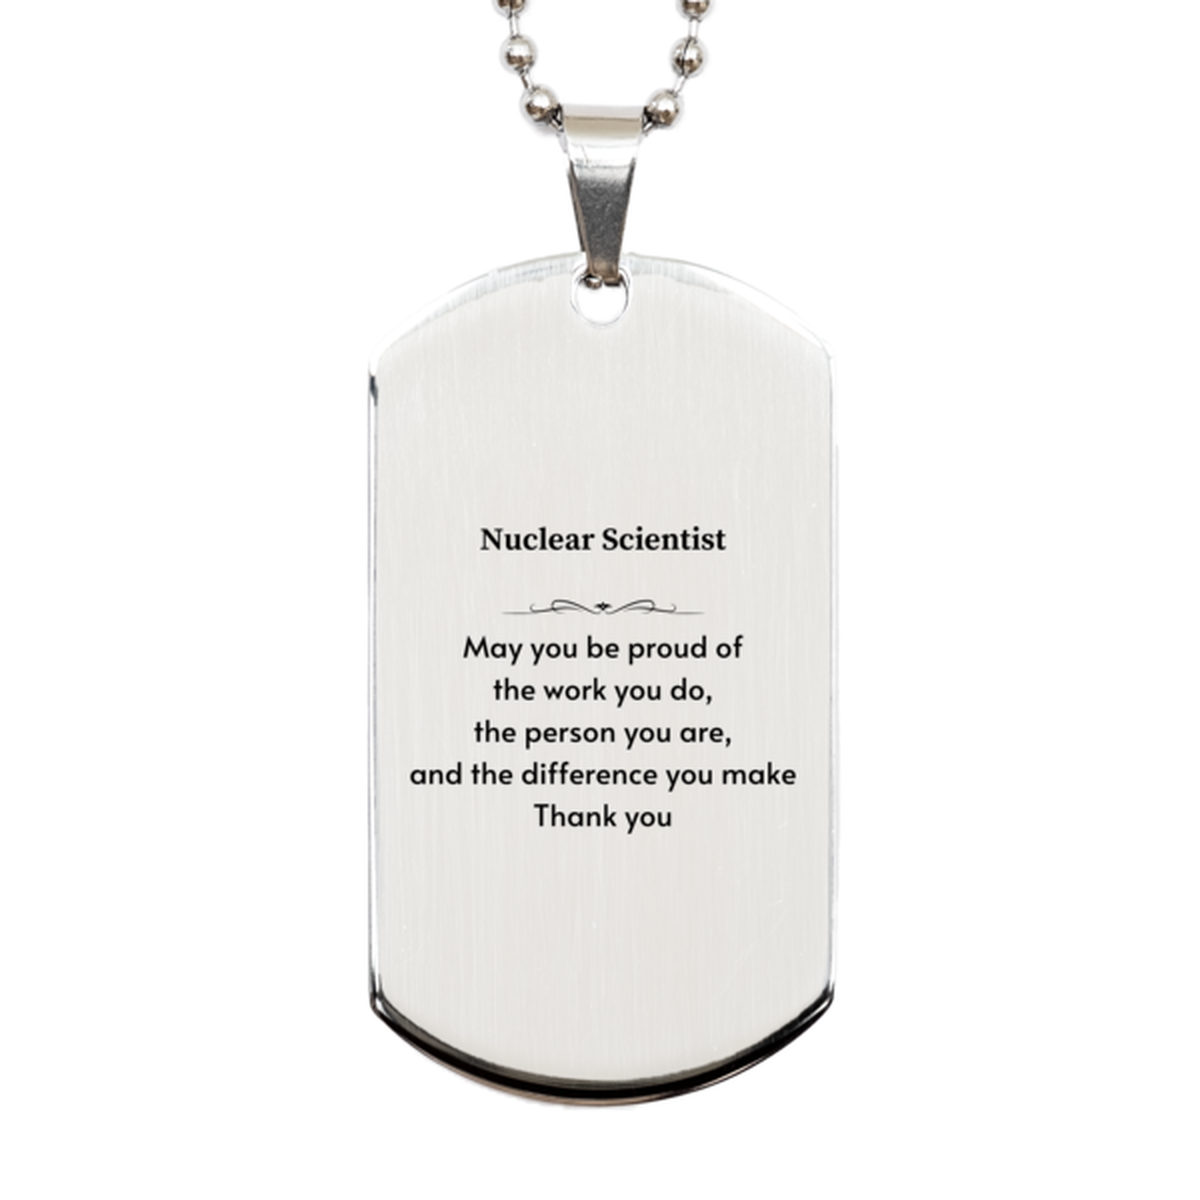 Heartwarming Silver Dog Tag Retirement Coworkers Gifts for Nuclear Scientist, Nuclear Scientist May You be proud of the work you do, the person you are Gifts for Boss Men Women Friends